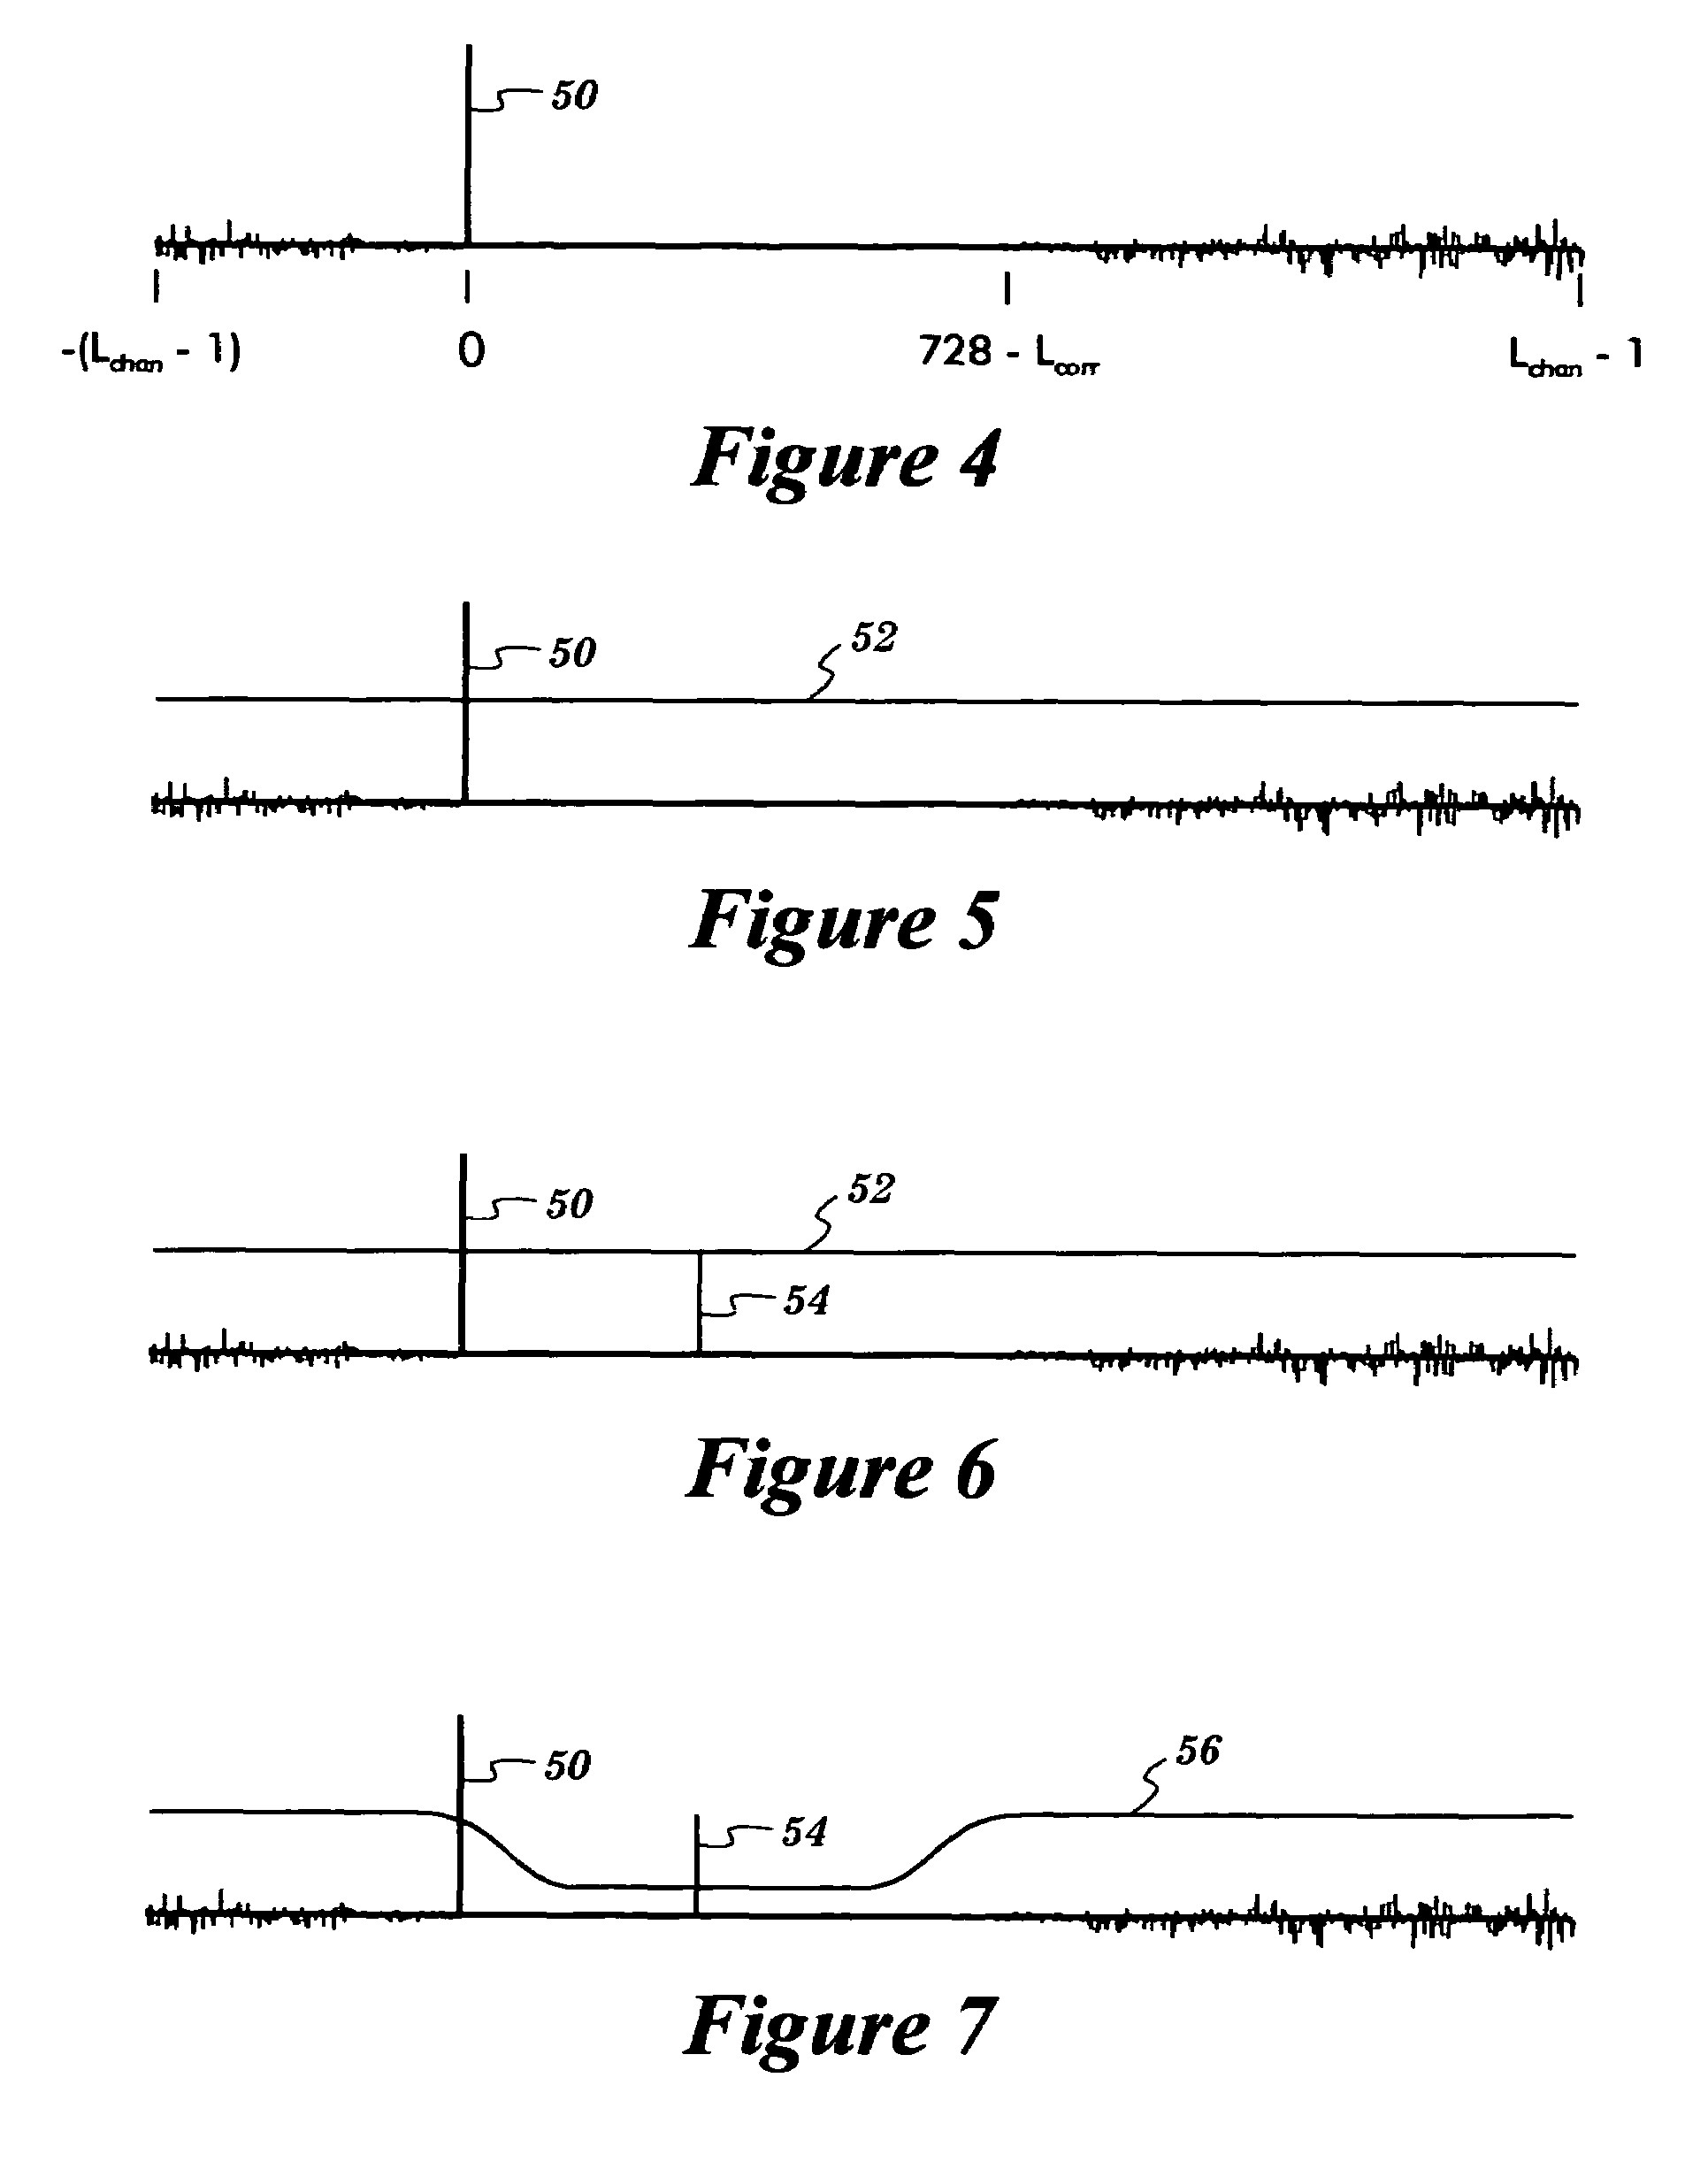 Adaptive thresholding algorithm for the noise due to unknown symbols in correlation based channel impulse response (CIR) estimate